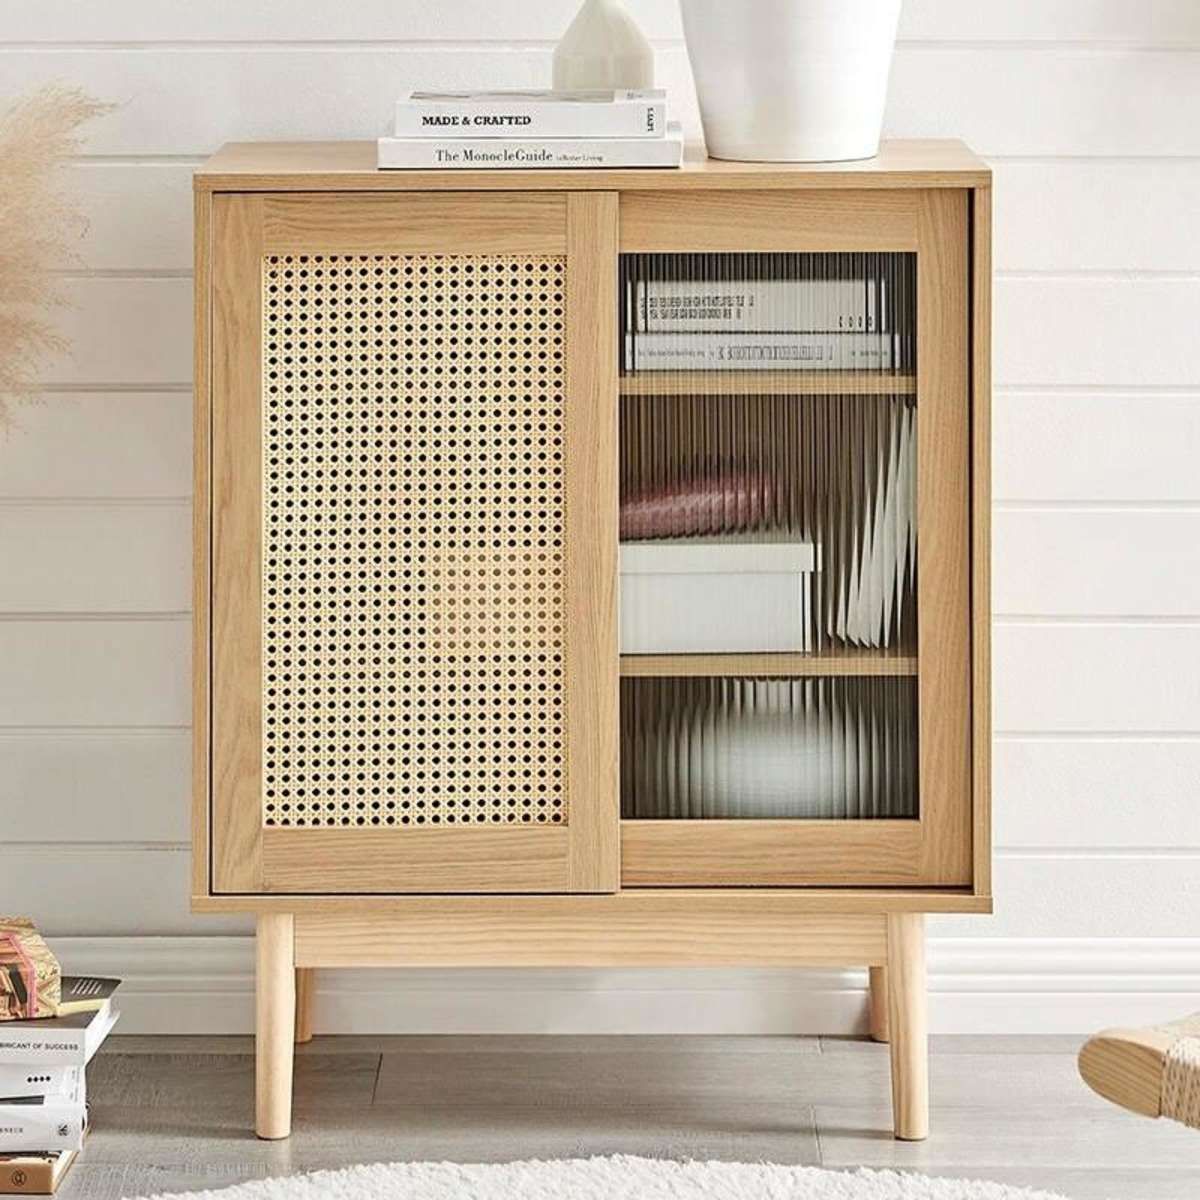 Furnic Rattan Buffet Sideboard Cabinet (natural) 1ea | Woolworths In Best And Newest Assembled Rattan Buffet Sideboards (View 2 of 15)